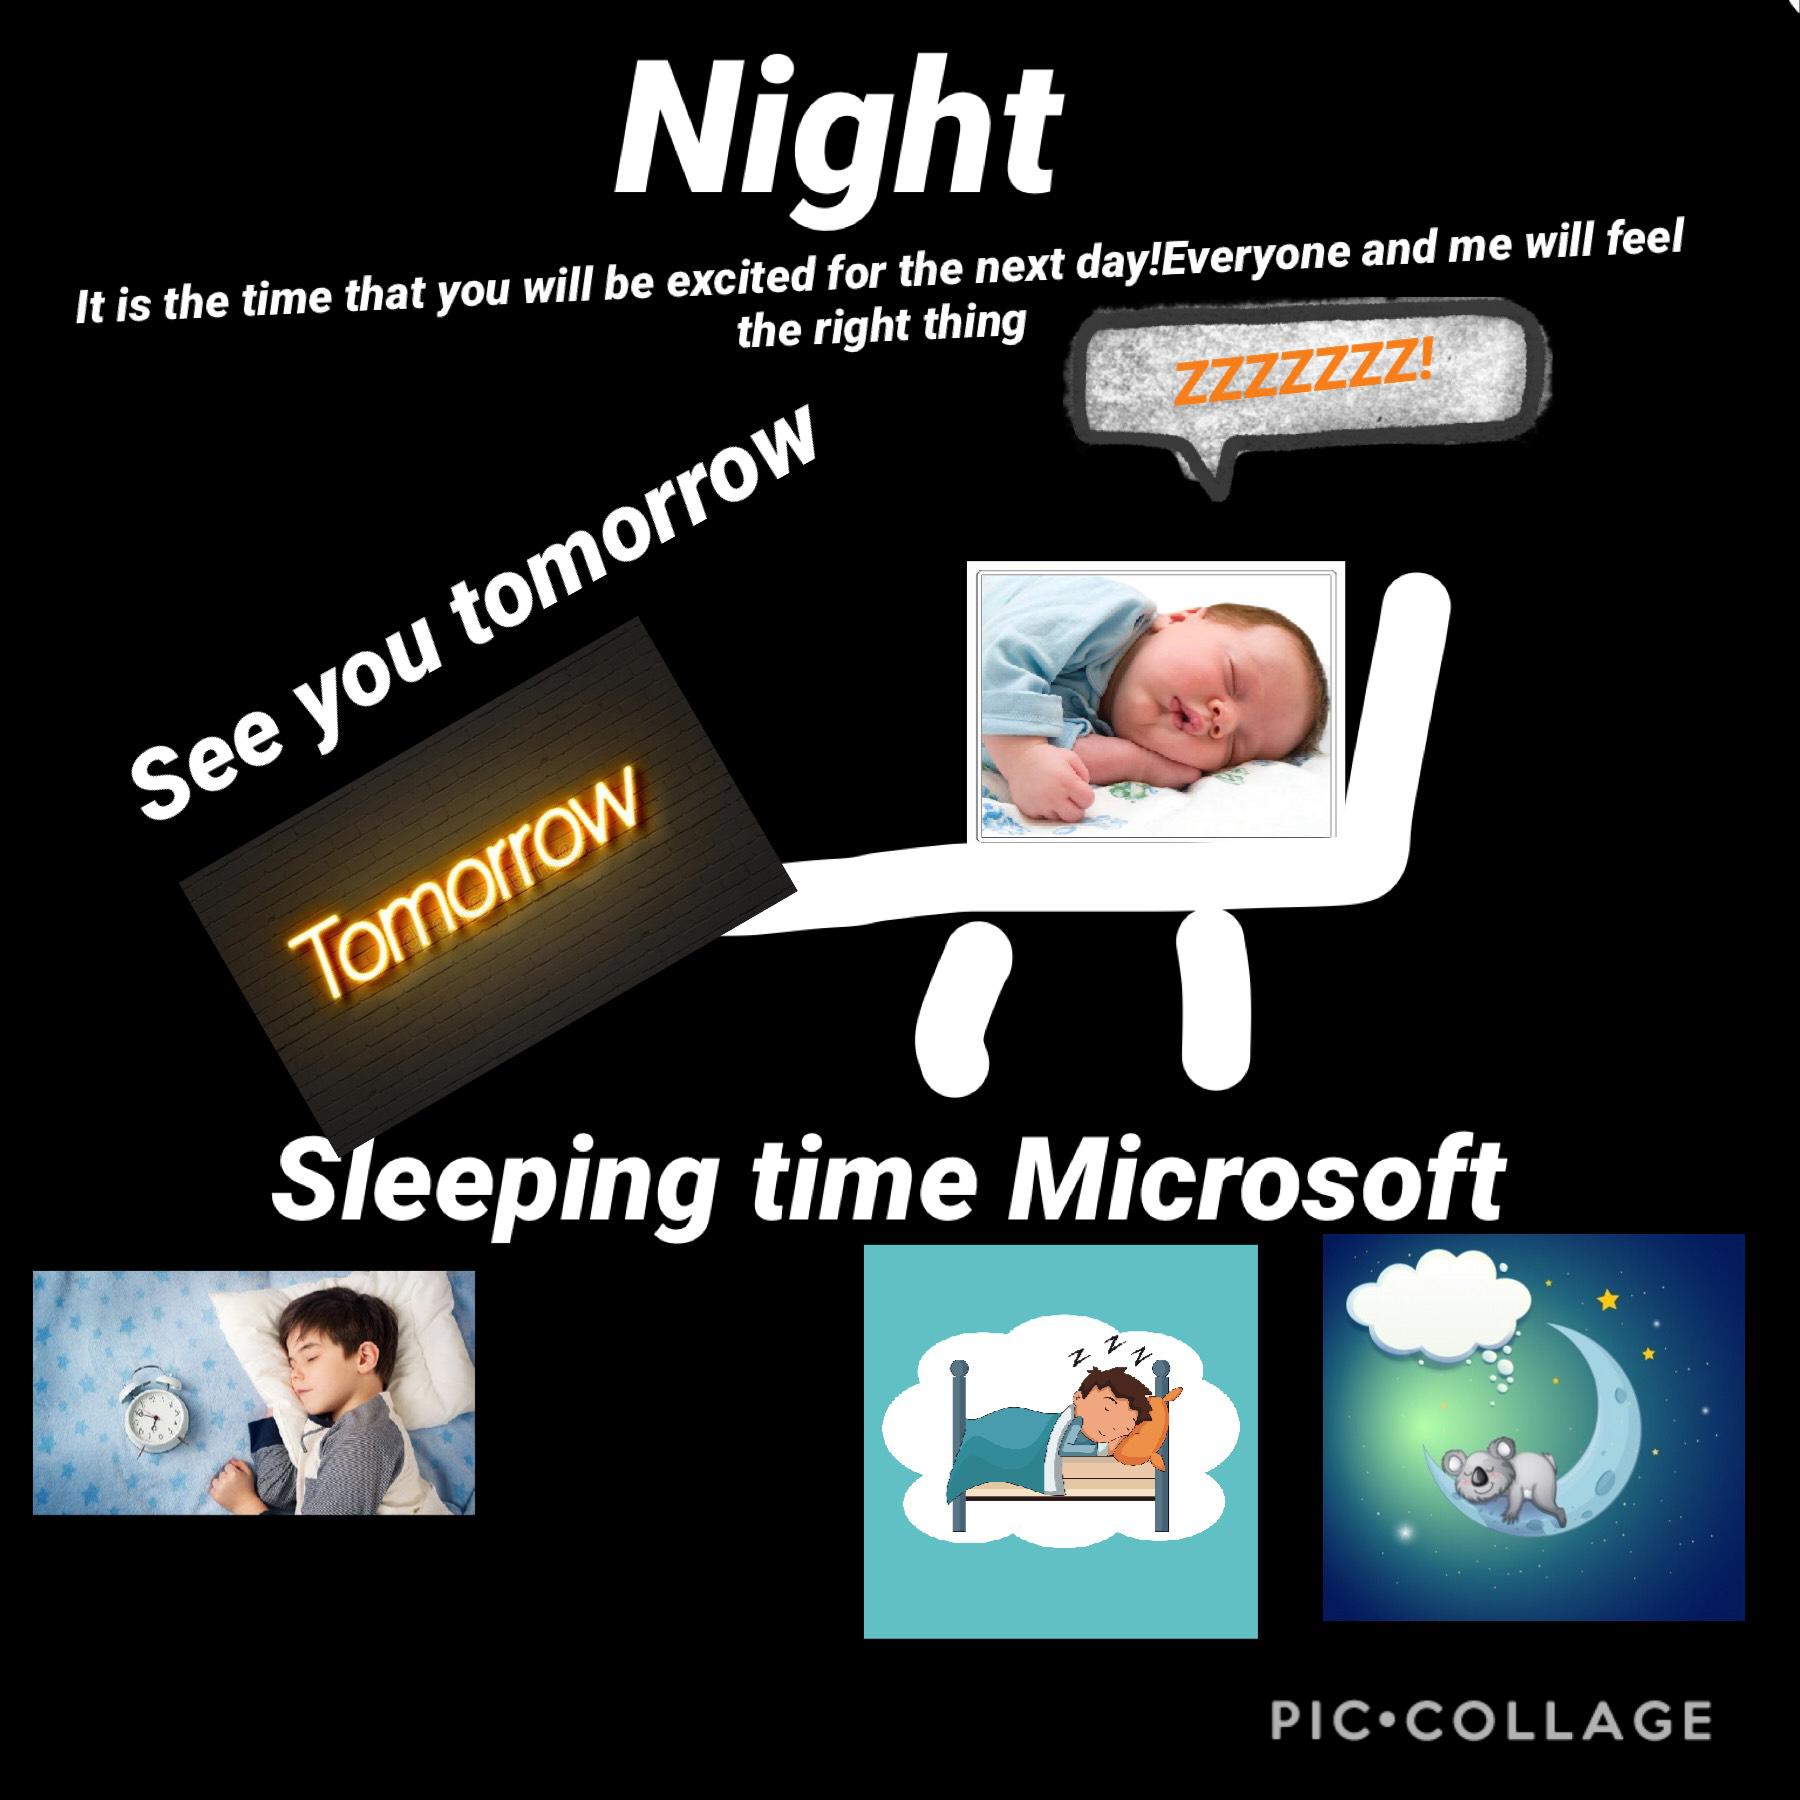 This is some thing that will keep you happy playing when you are sleeping.I wish this will also help some baby by sleeping.